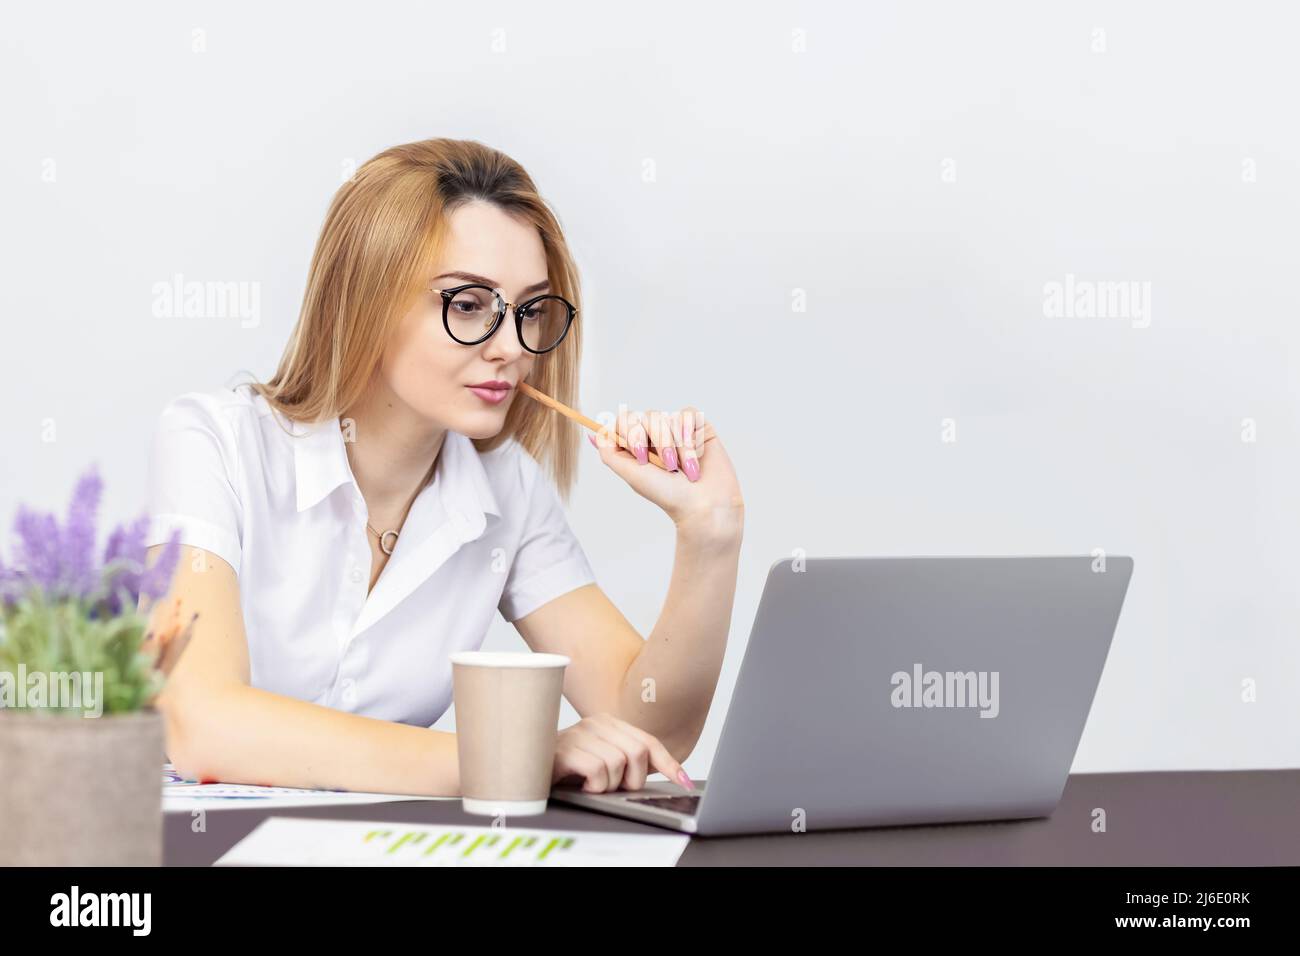 Portrait of blond woman working on laptop from office Stock Photo